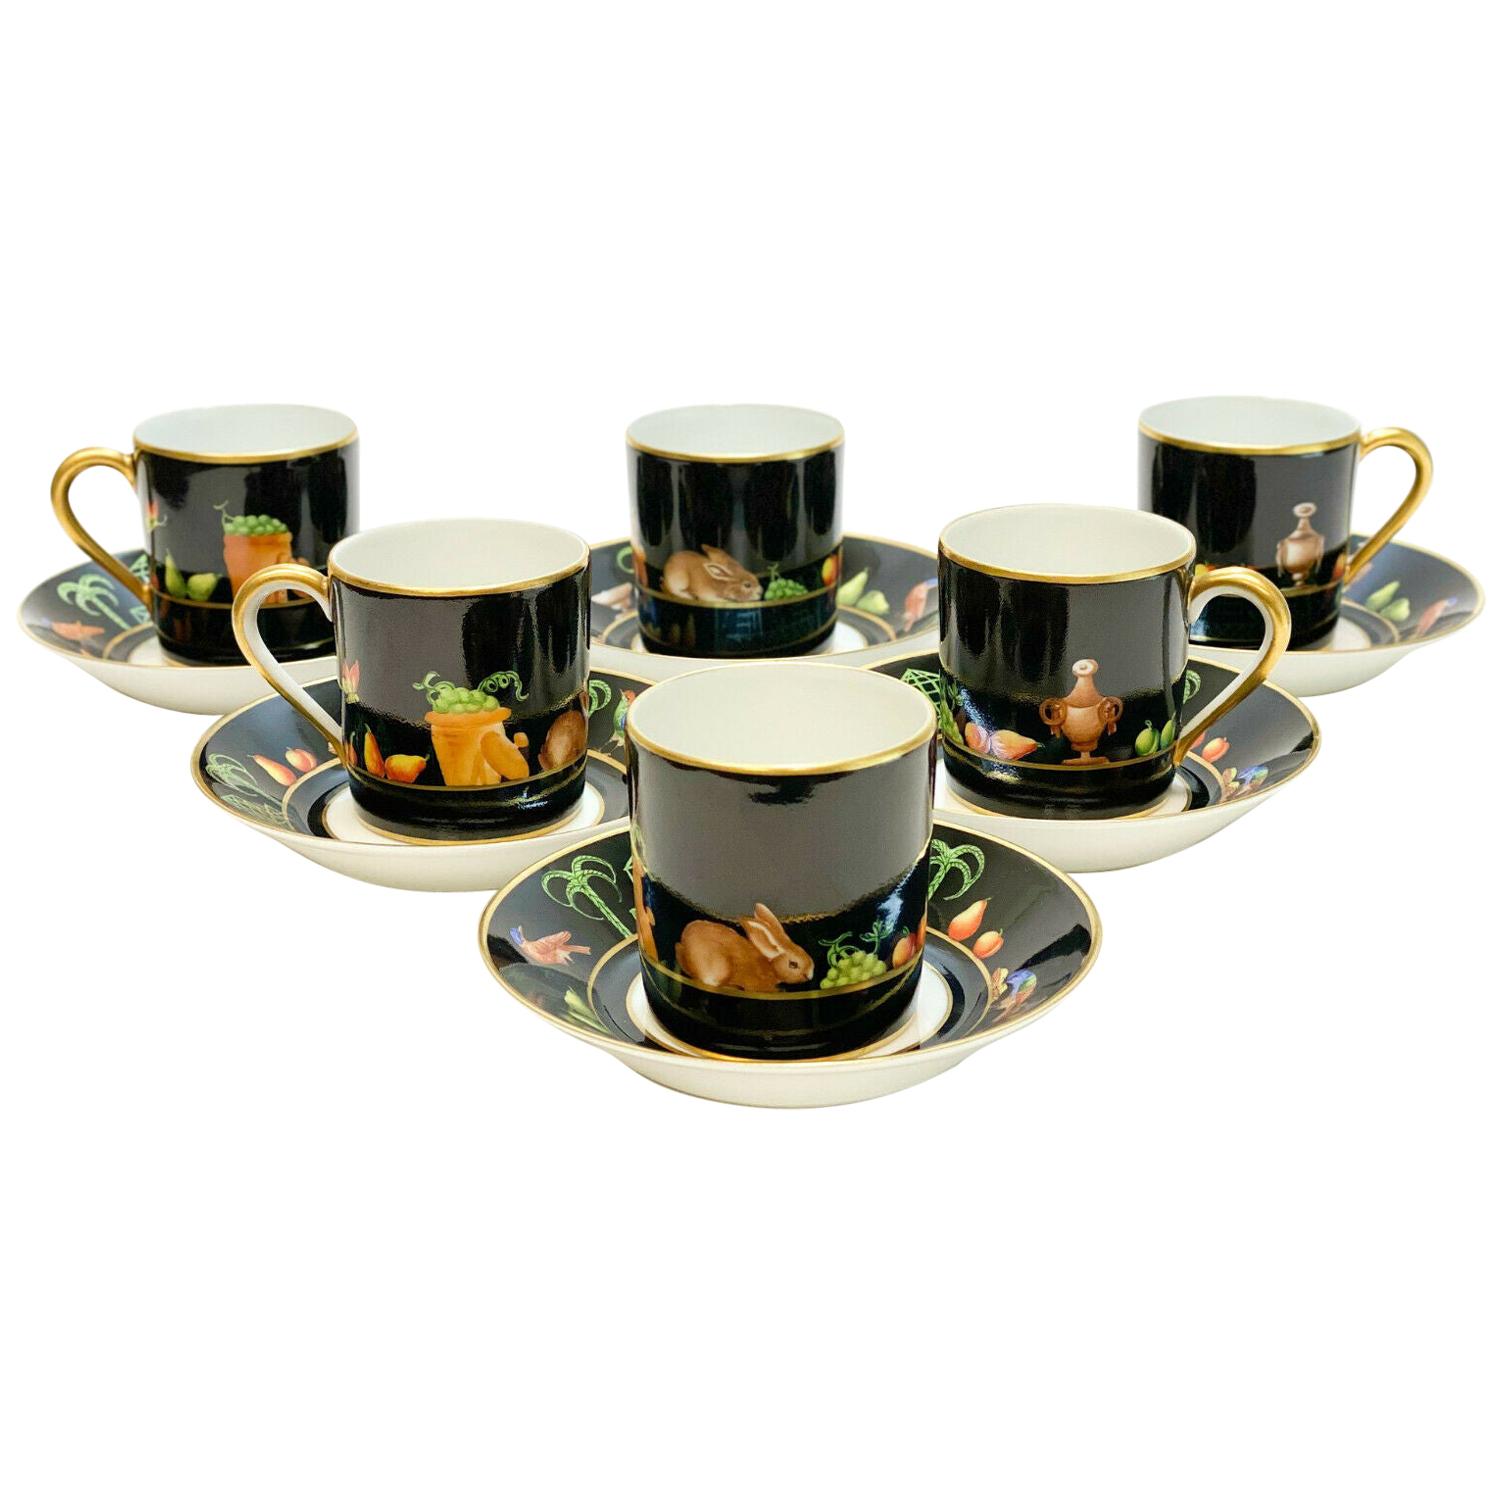 6 Tiffany Private Stock Le Tallec Porcelain Cup and Saucers Black Shoulder For Sale